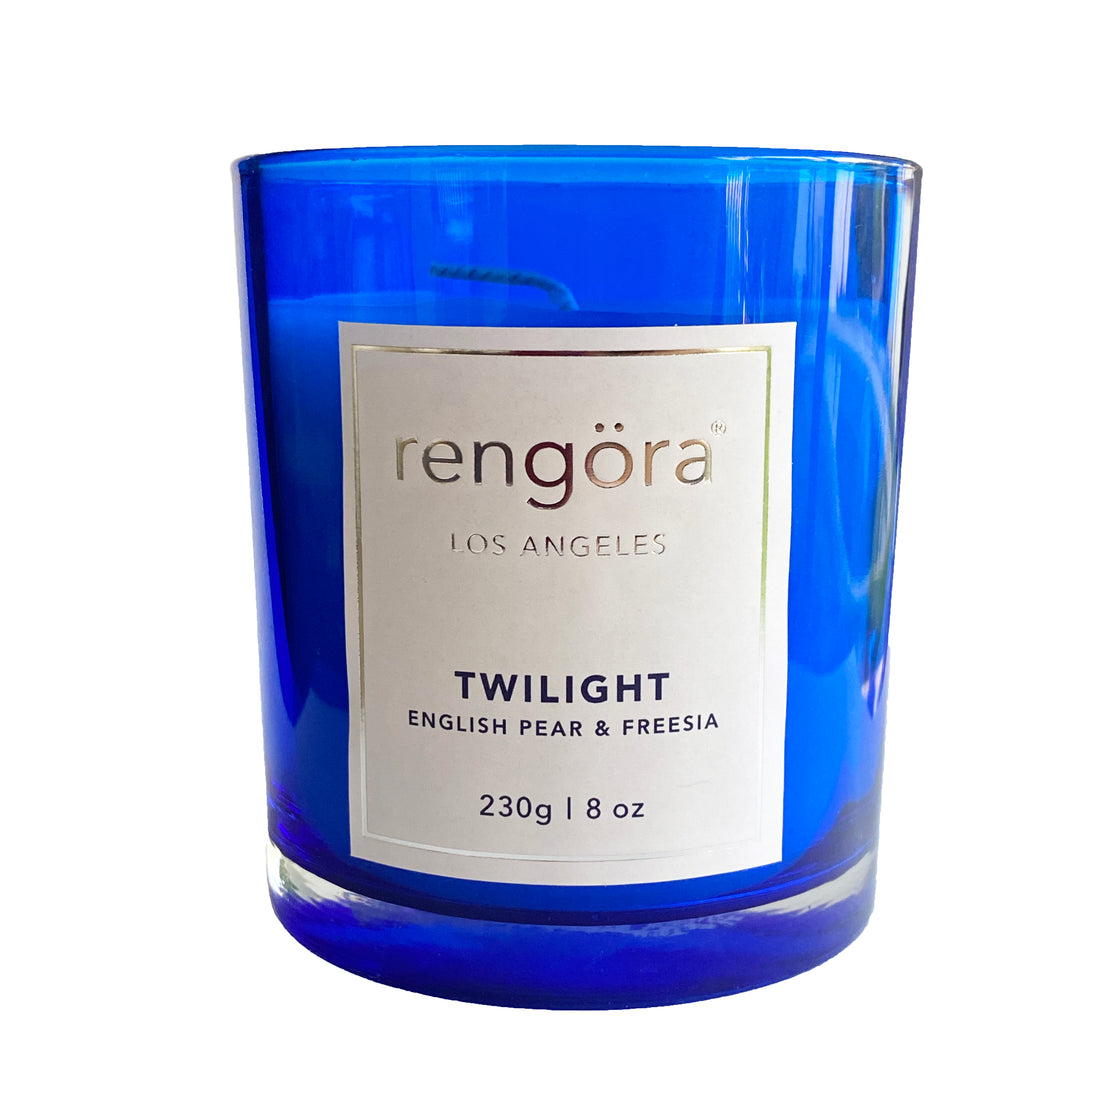 Scented Candle for Home - English Pear & Freesia